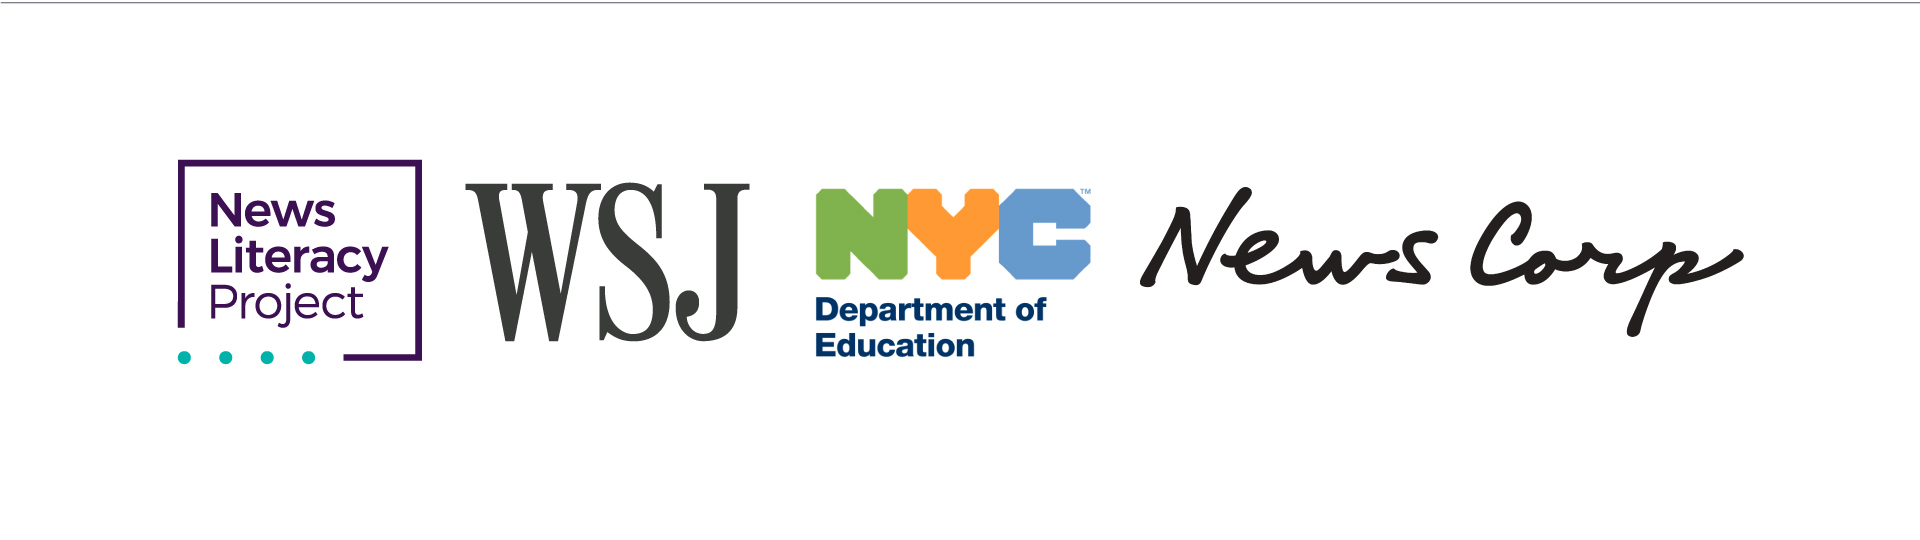 sponsors logos including news literacy project logo, wall street journal logo, nyc department of education logo, and news corp logo